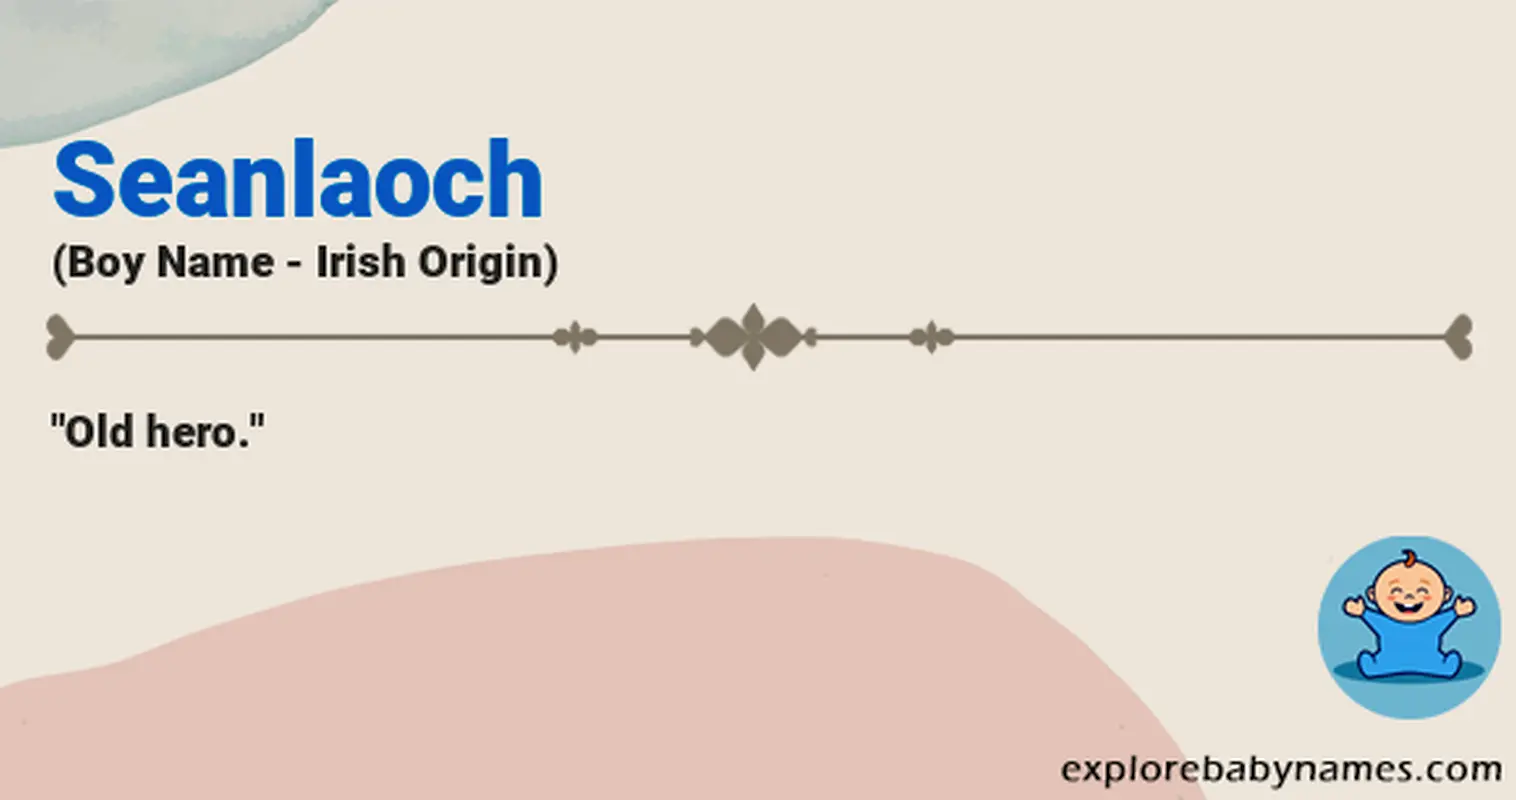 Meaning of Seanlaoch